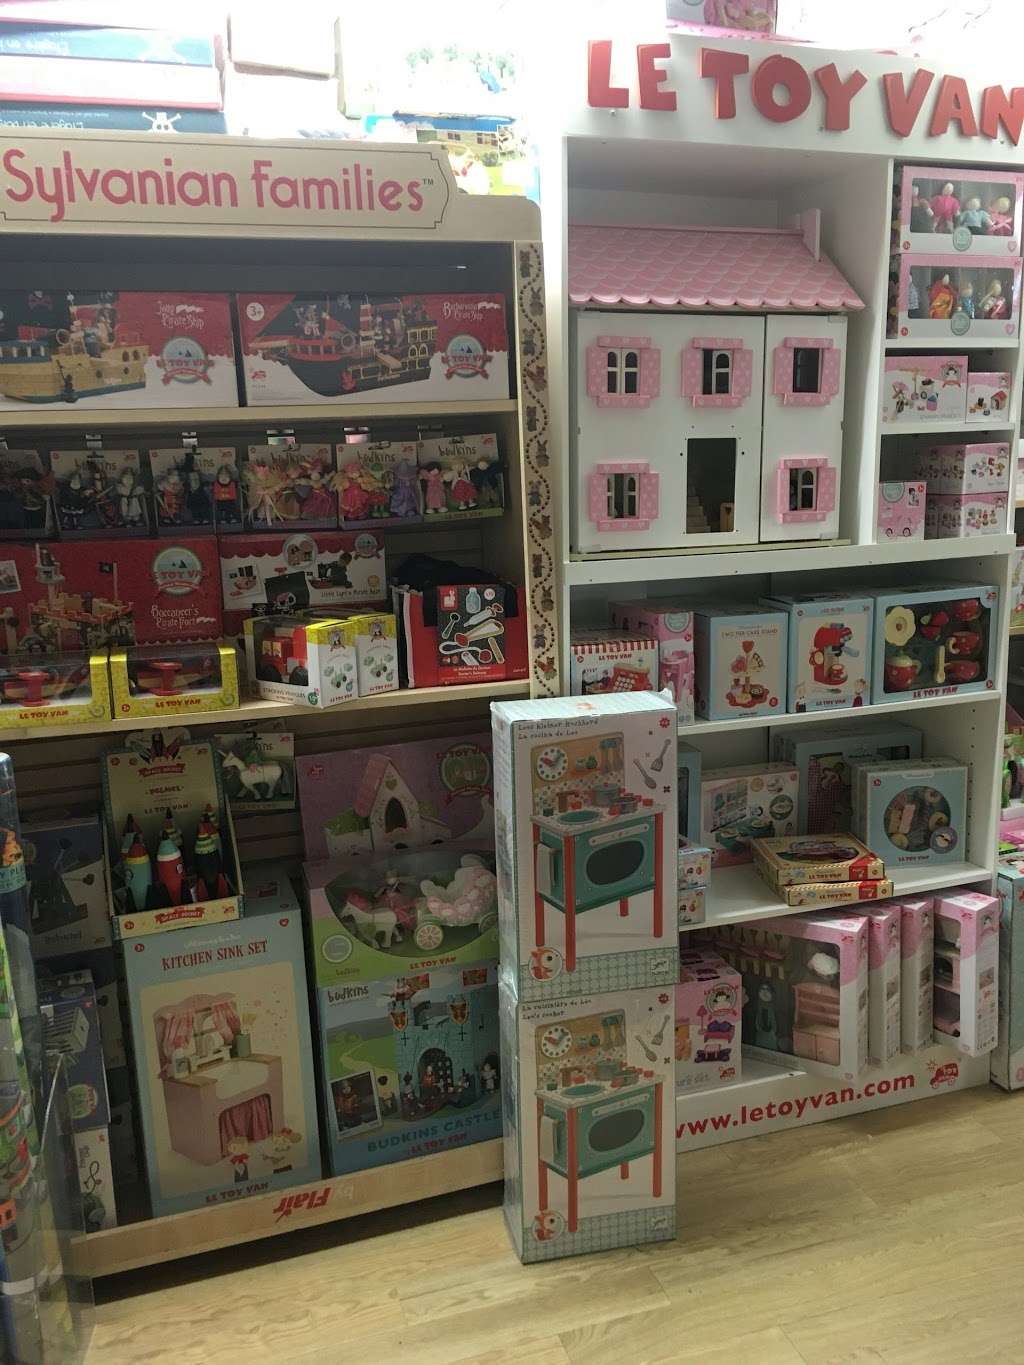 Cachao Toys | 142 Regents Park Rd, Camden Town, London NW1 8XL, UK | Phone: 020 7449 9057